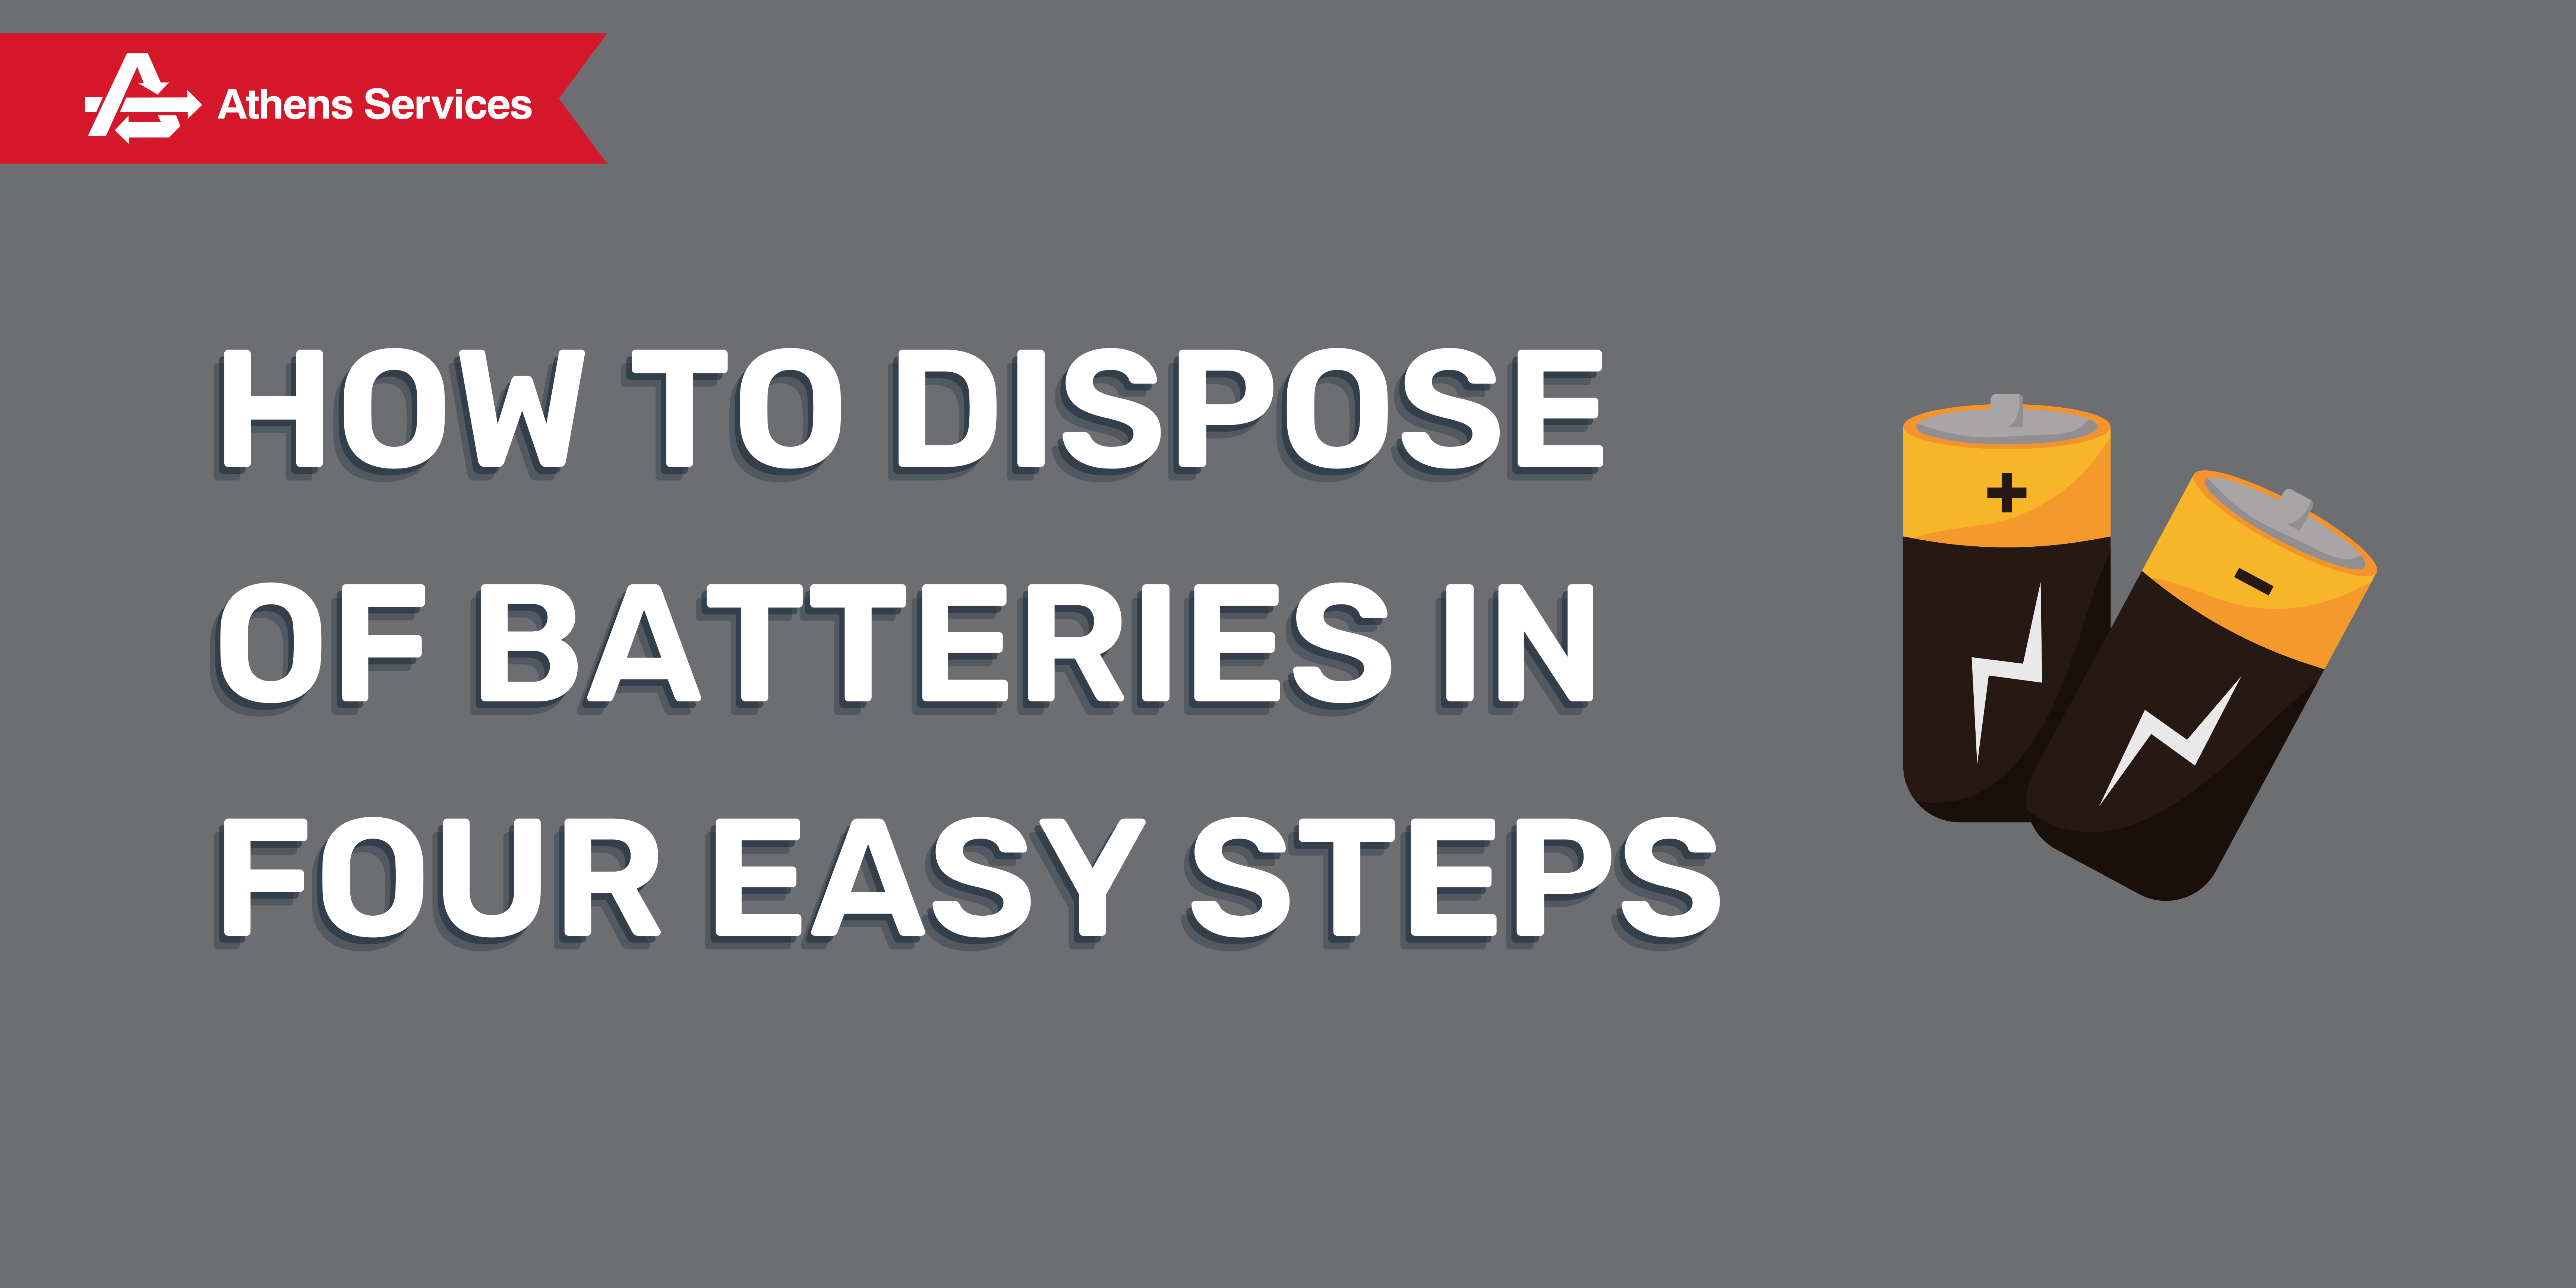 11How to dispose of Batteries in Four Easy Steps